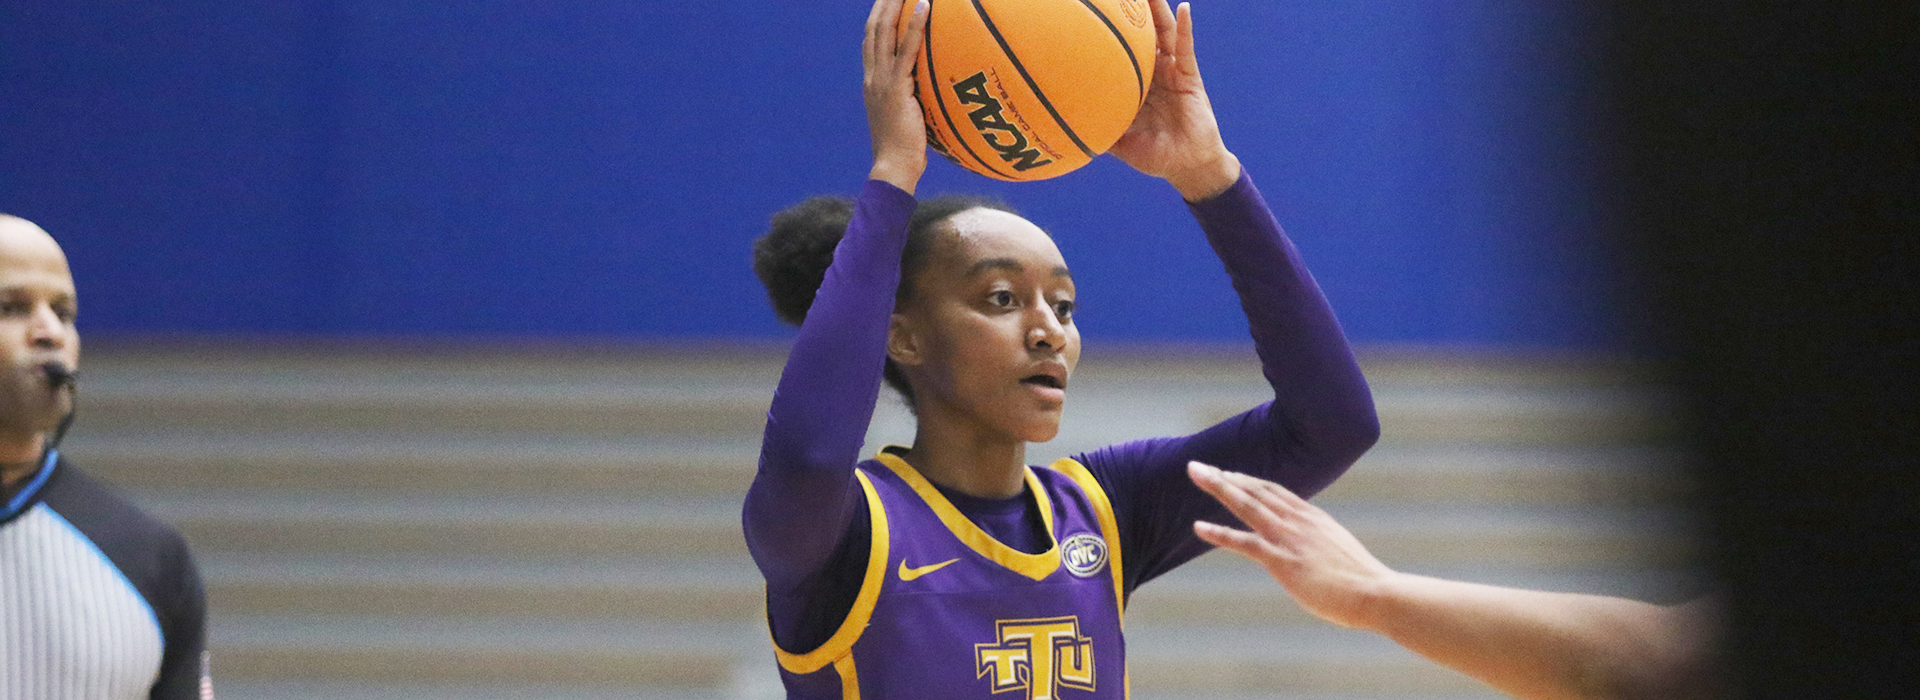 Tech women host Morehead State Saturday afternoon